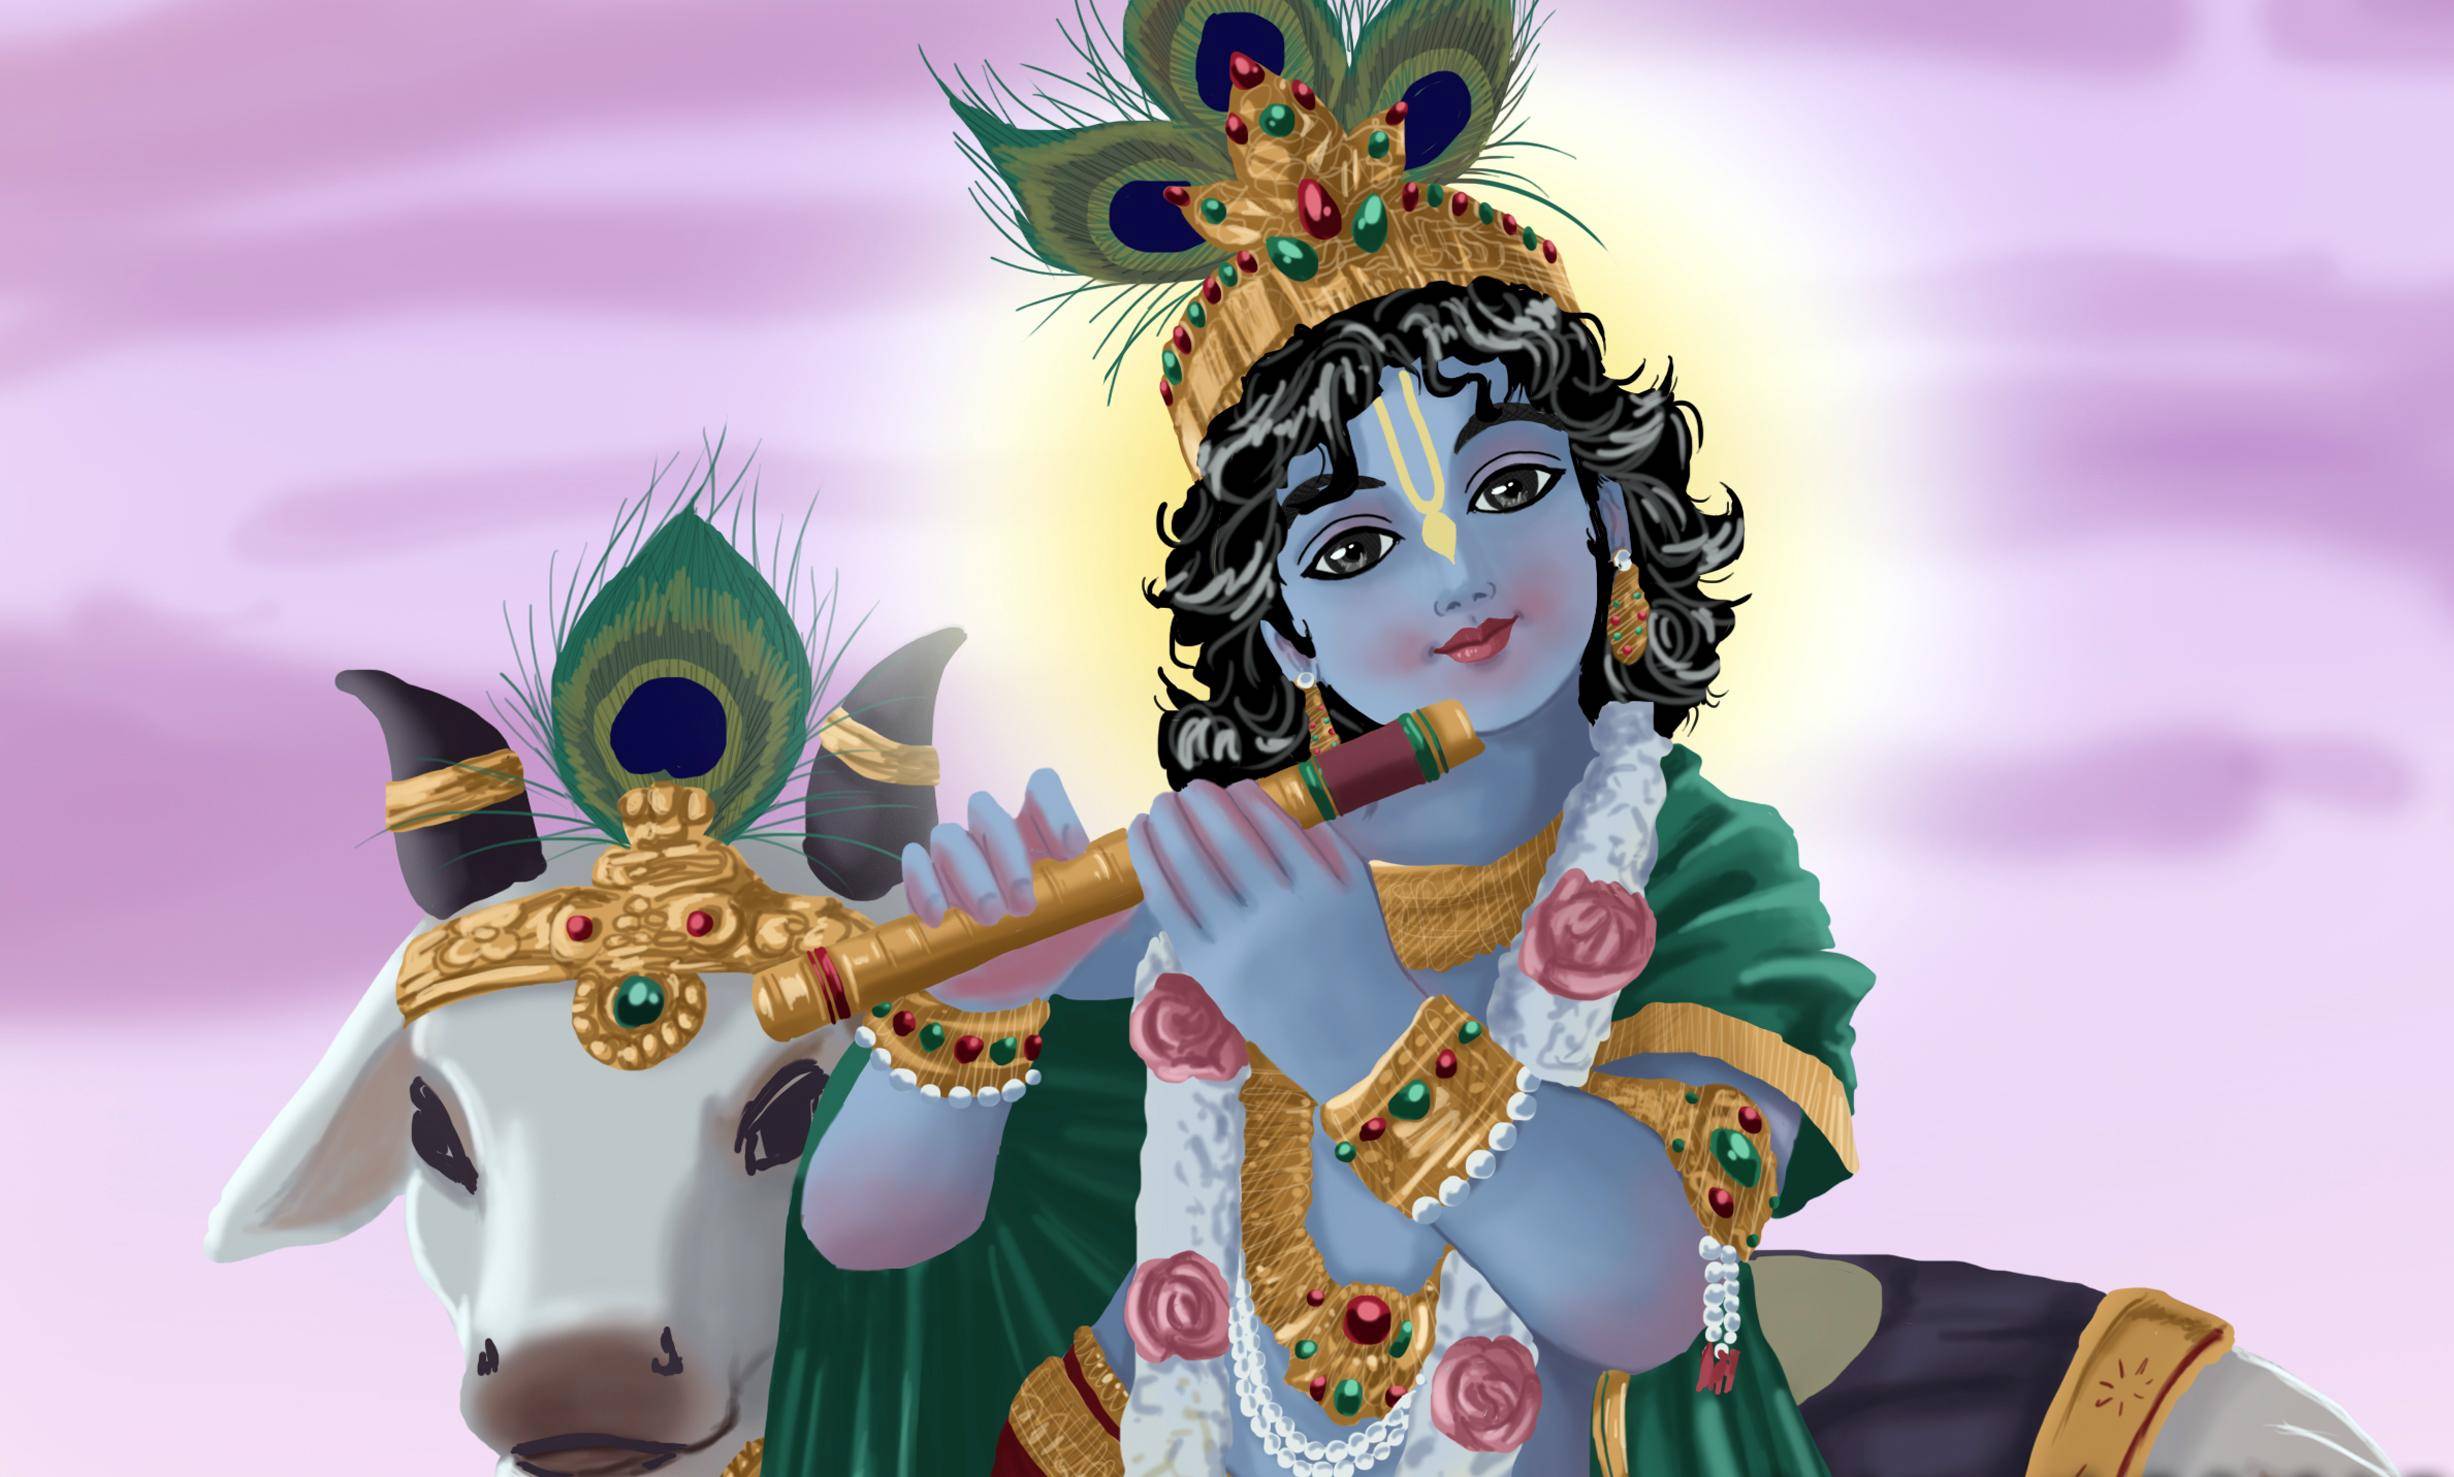 animated images of lord krishna for computer screen